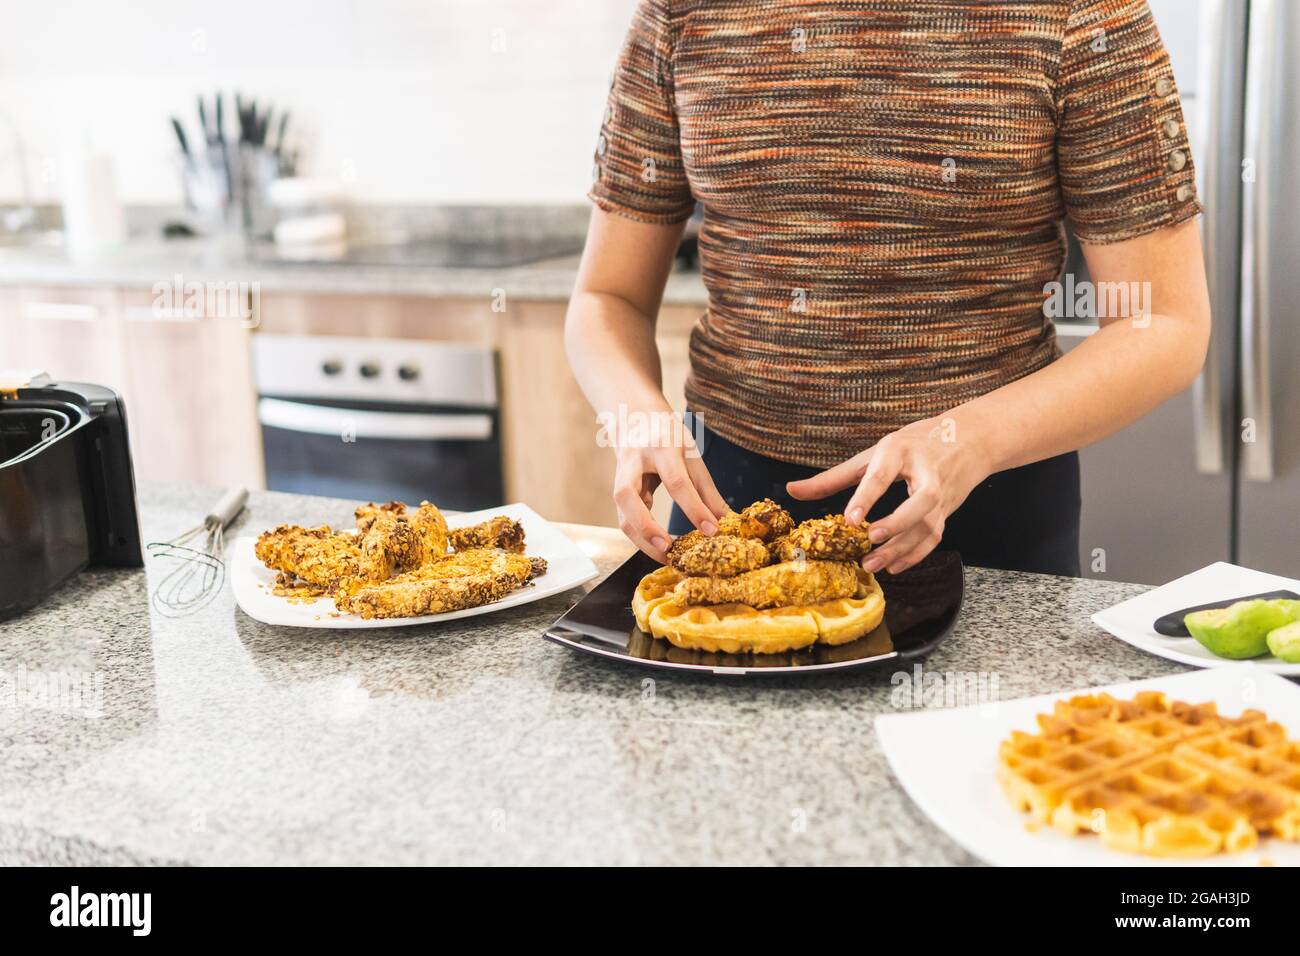 unrecognizable woman plating cereal battered fried chicken over waffles and syrup Stock Photo